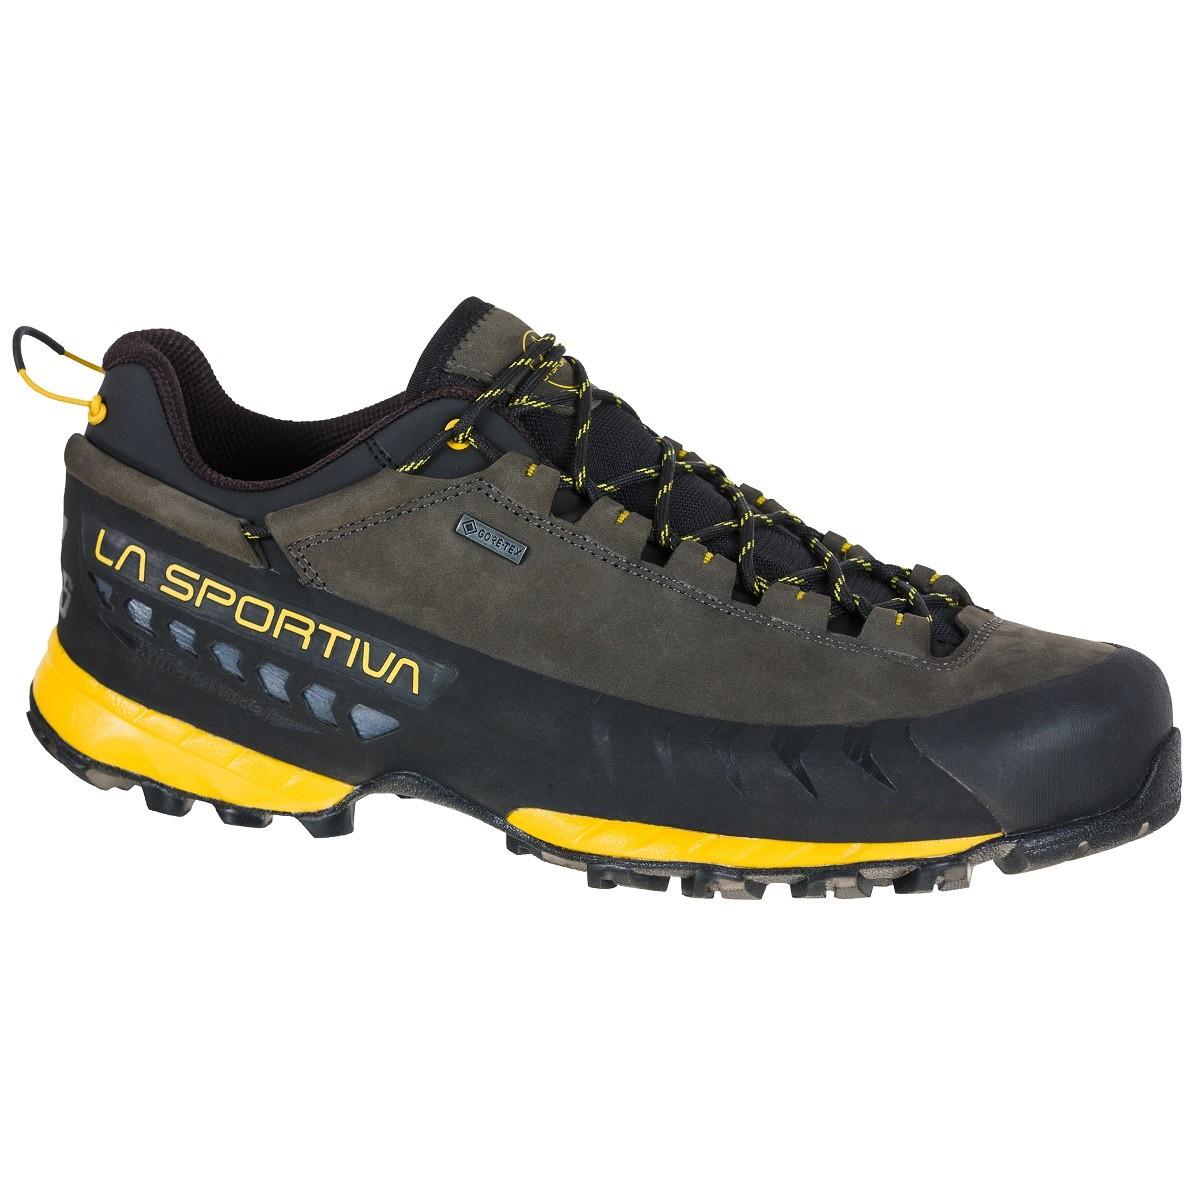 Image of Chaussures d'approche La Sportiva TX5 Gore-Tex - Carbon/Yellow